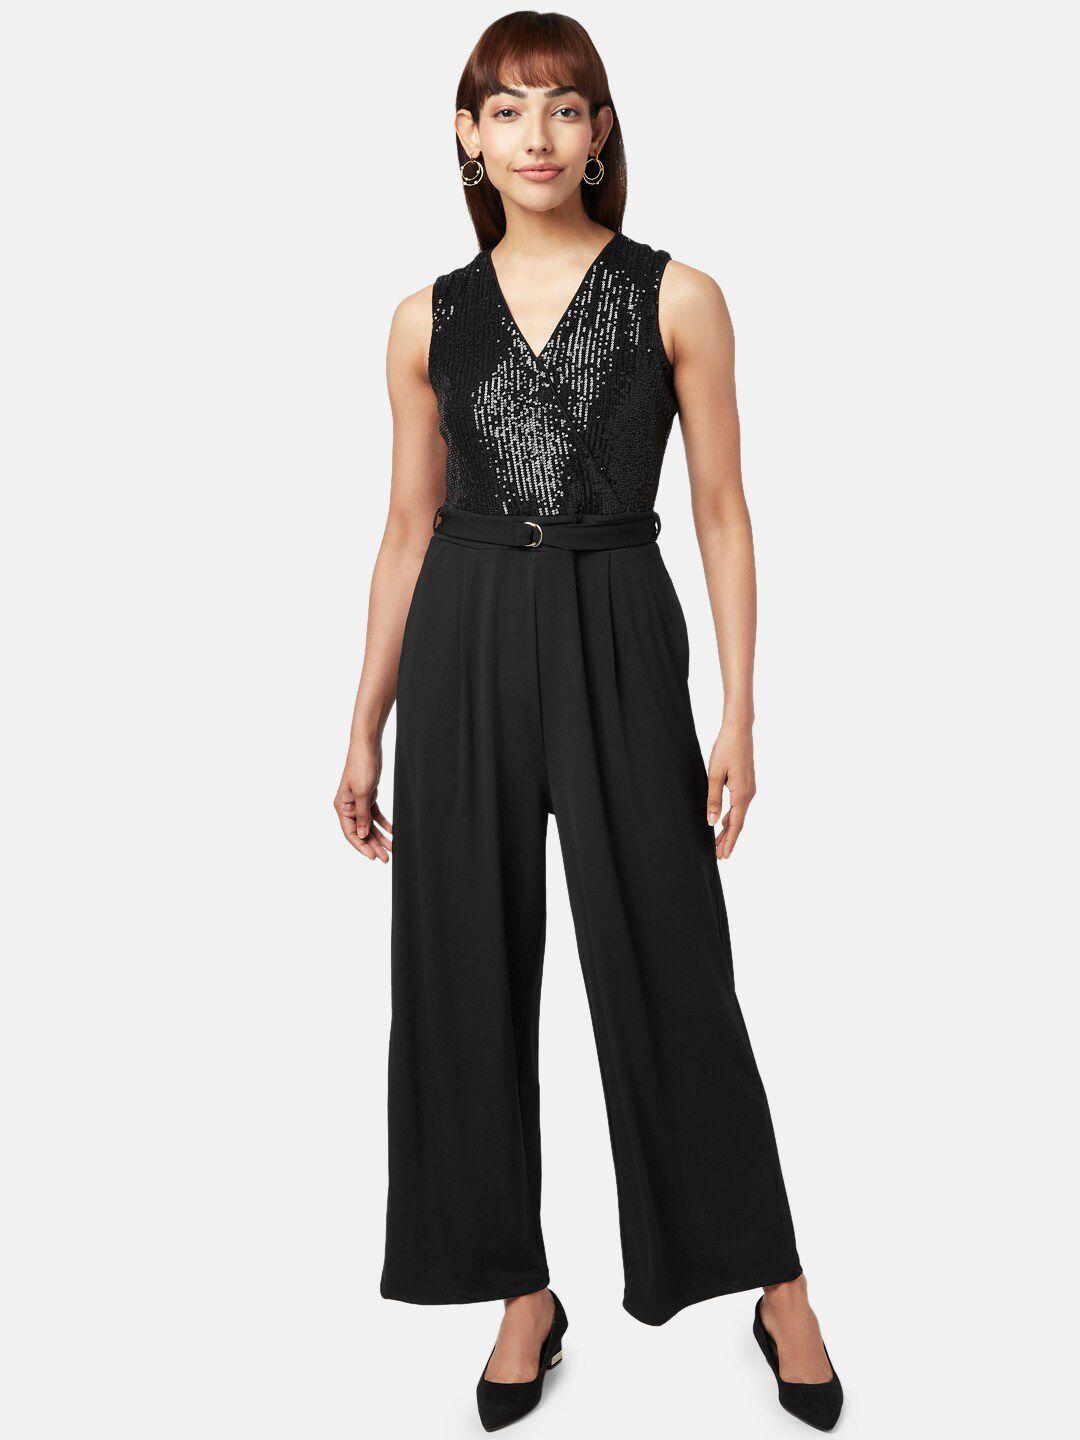 annabelle by pantaloons black basic jumpsuit with embellished